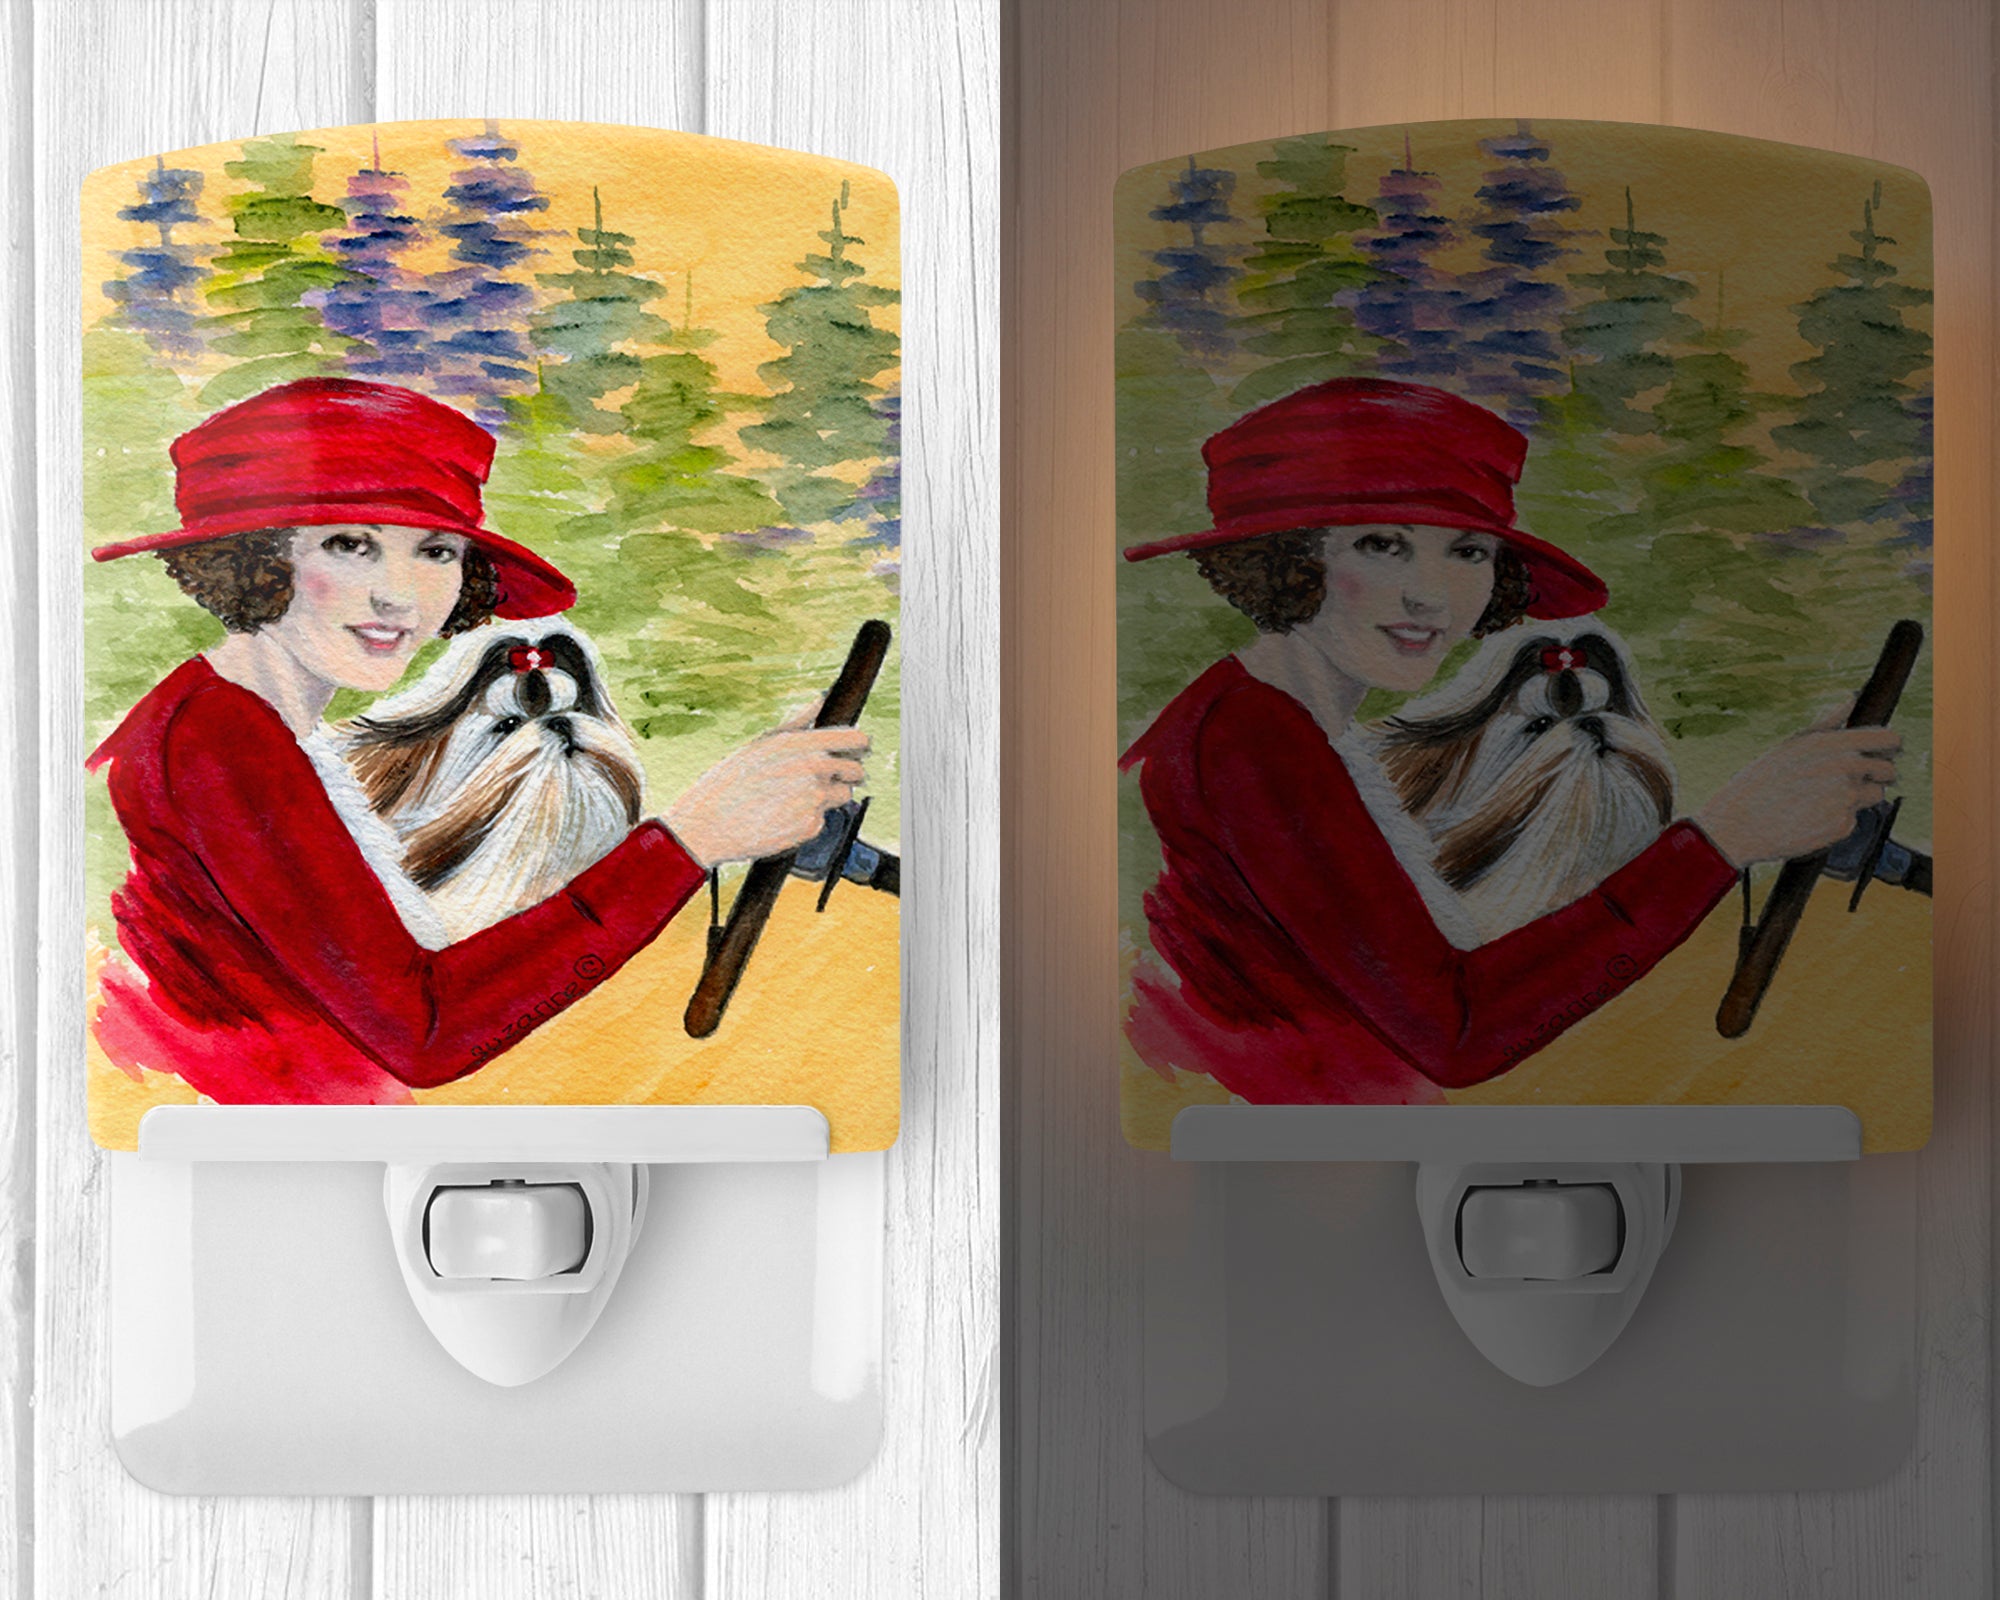 Lady driving with her Shih Tzu Ceramic Night Light SS8539CNL - the-store.com